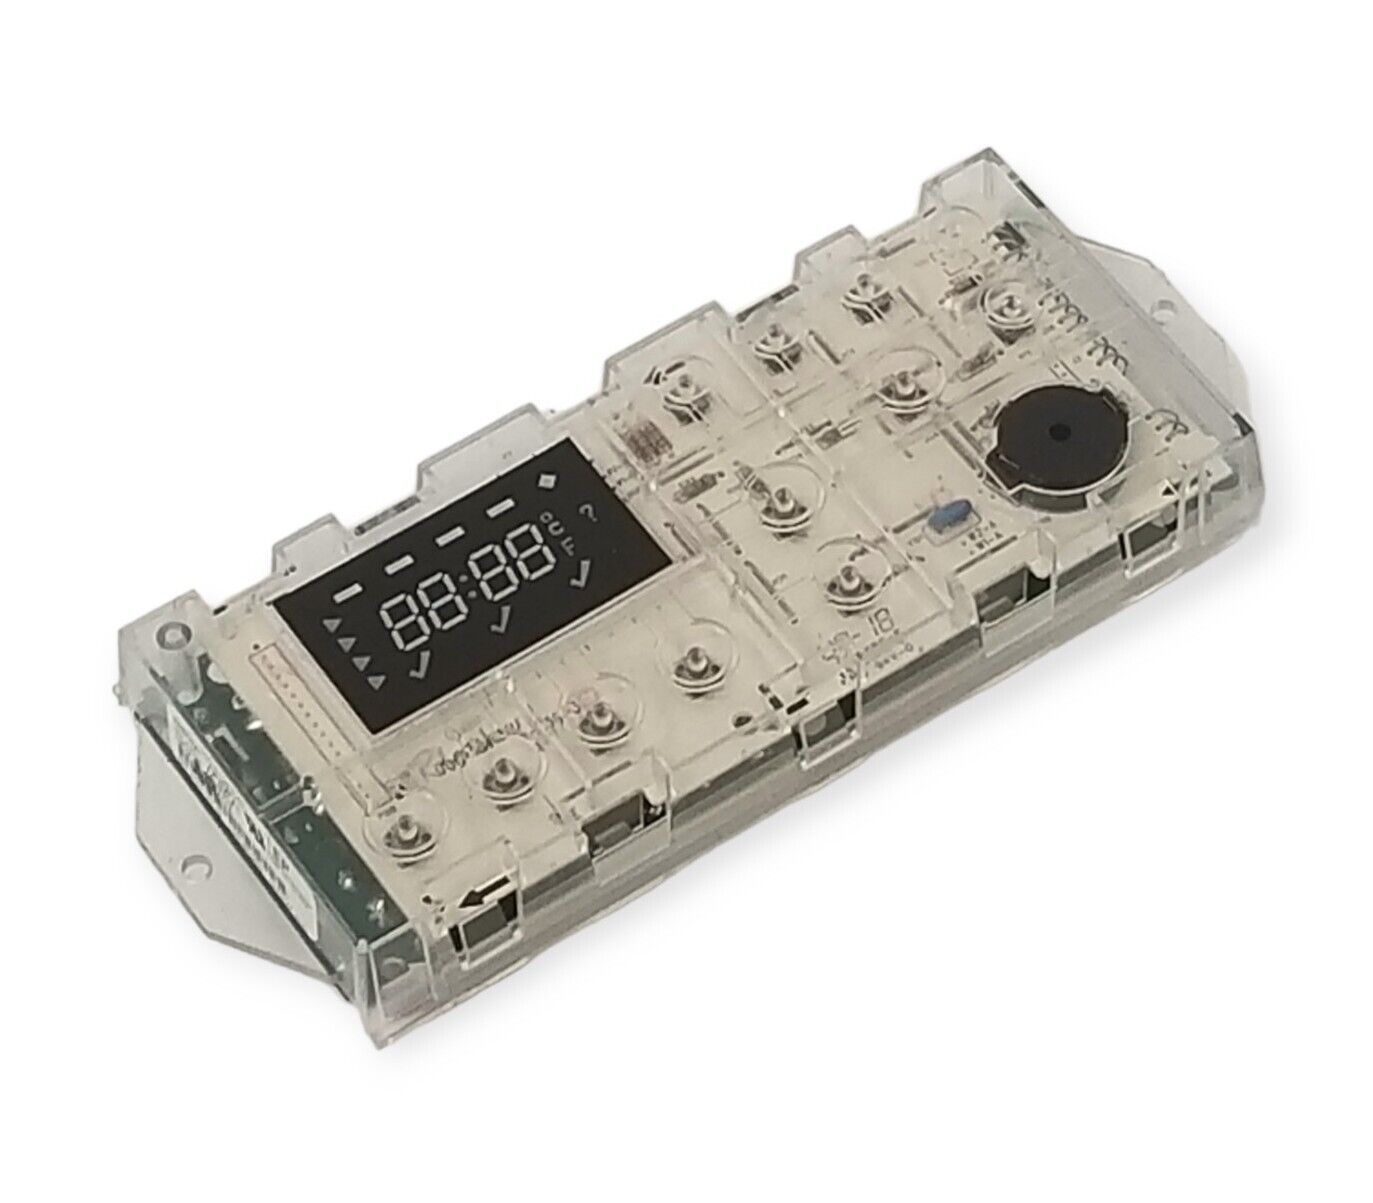 Genuine OEM Replacement for Whirlpool Range Control 9761119